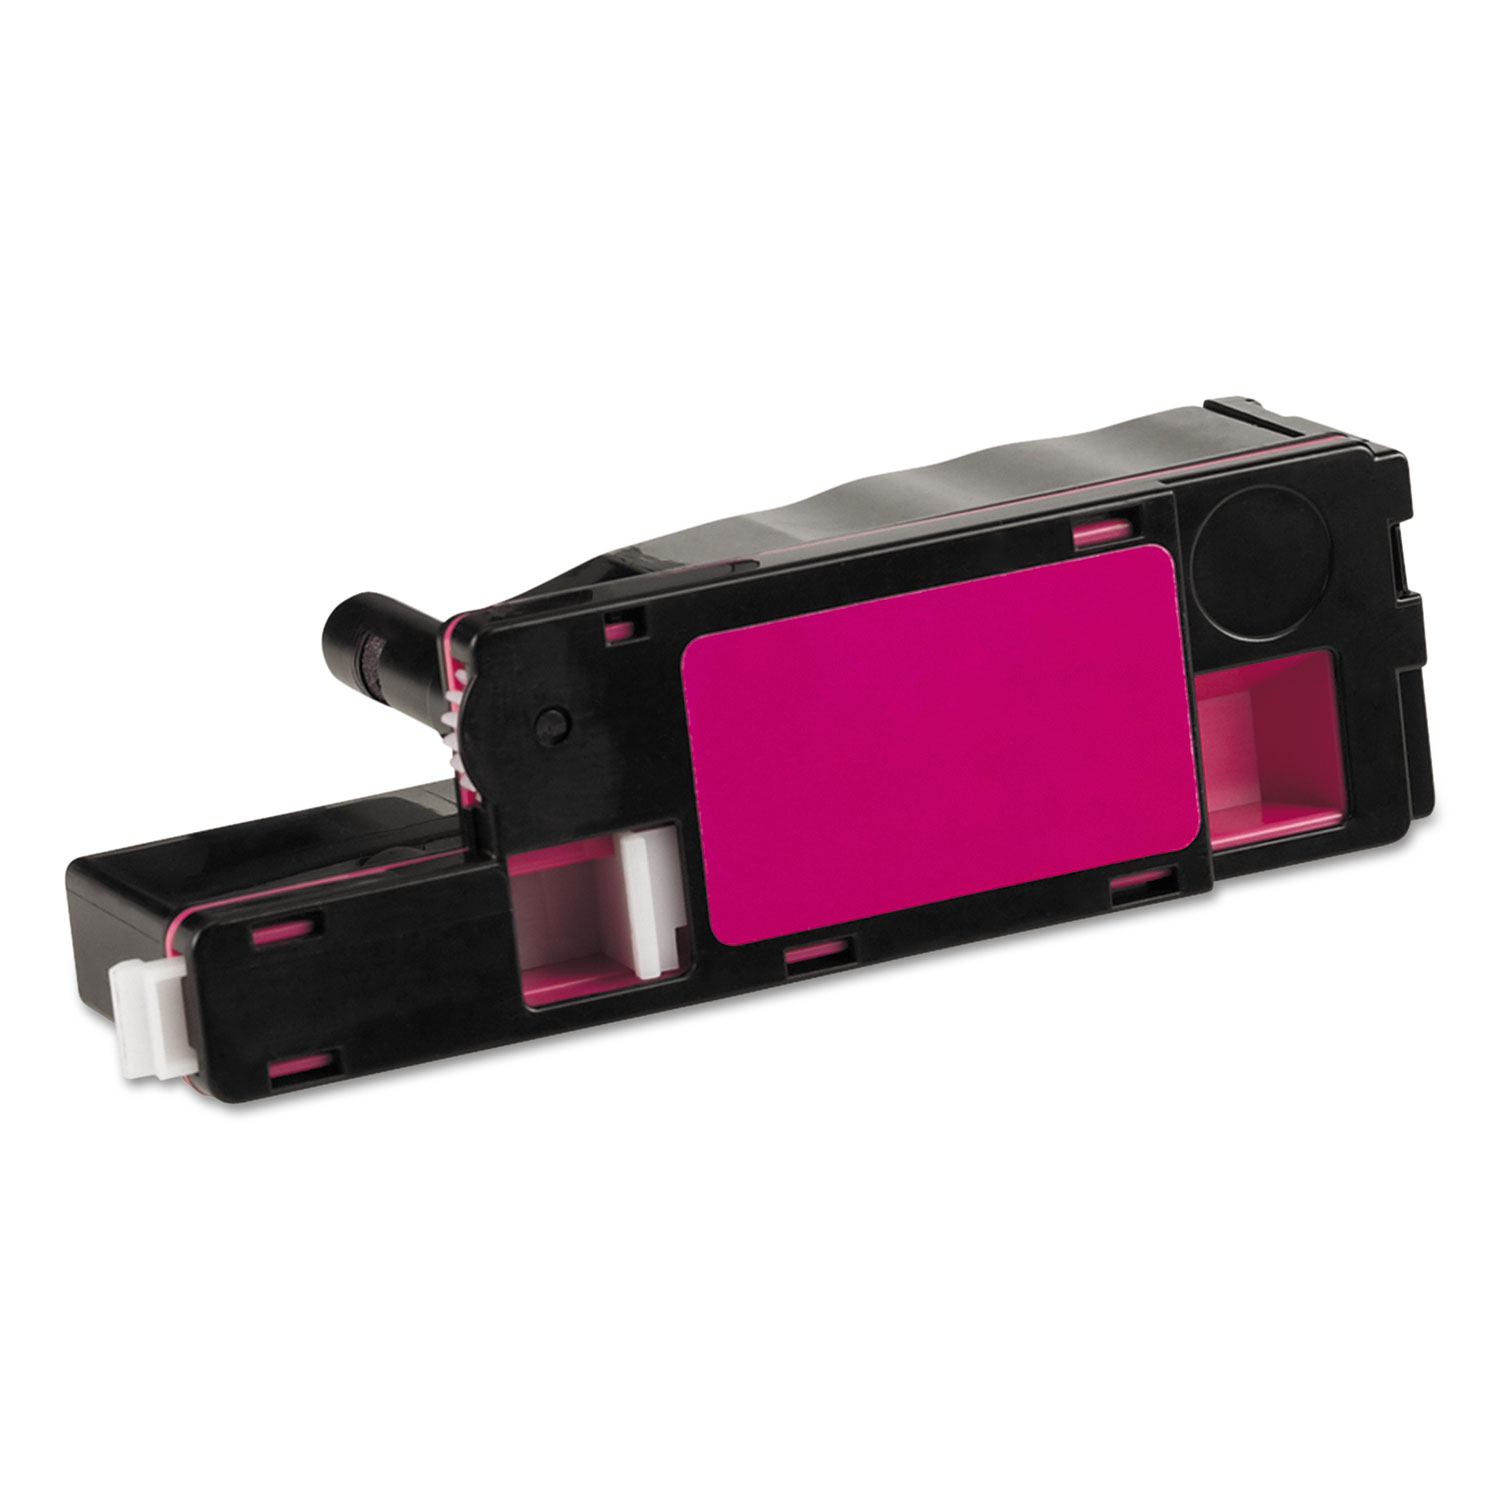  Media Sciences 41087 41087 Remanufactured 331-0780 (5GDTC) High-Yield Toner, 1400 Page-Yield, Magenta (MDA41087) 